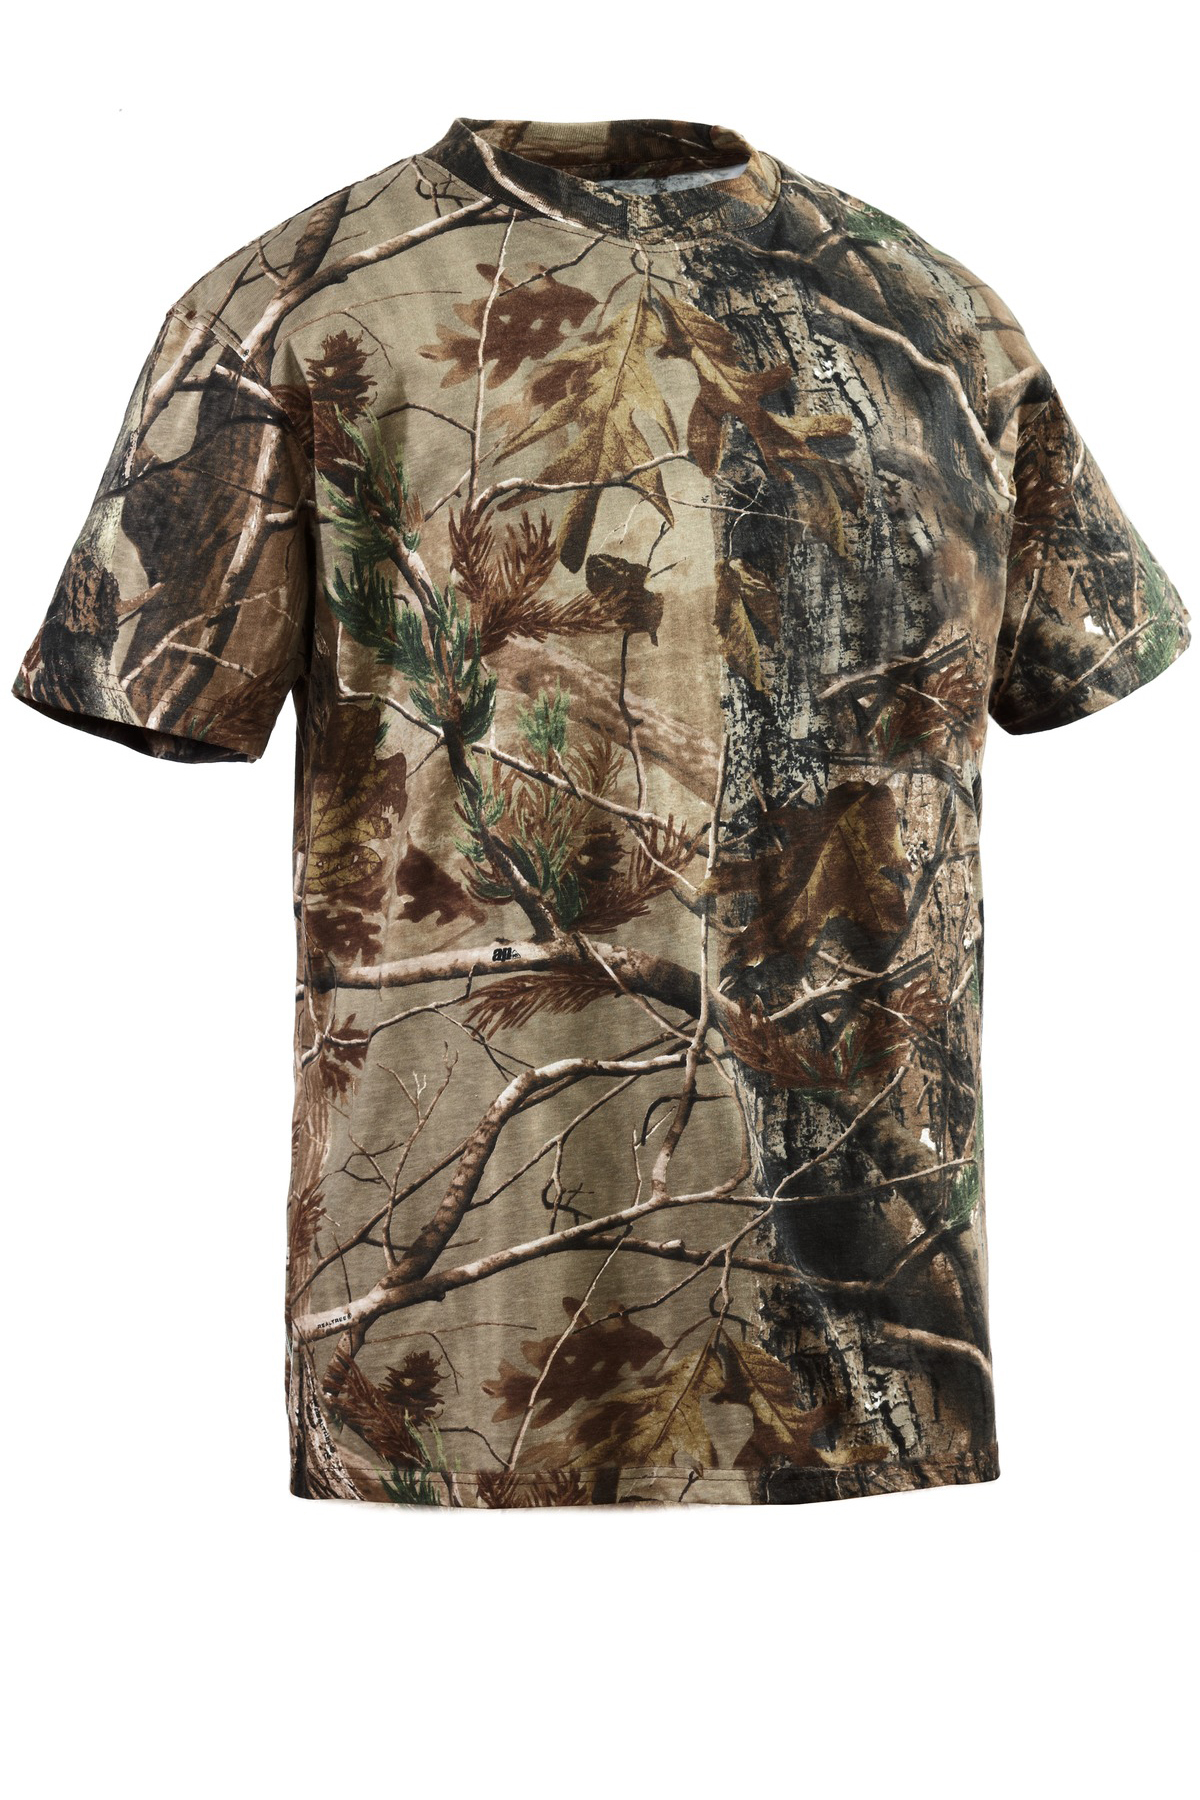 Russell Outdoors - Realtree Explorer 100% Cotton T-Shirt | Product | SanMar